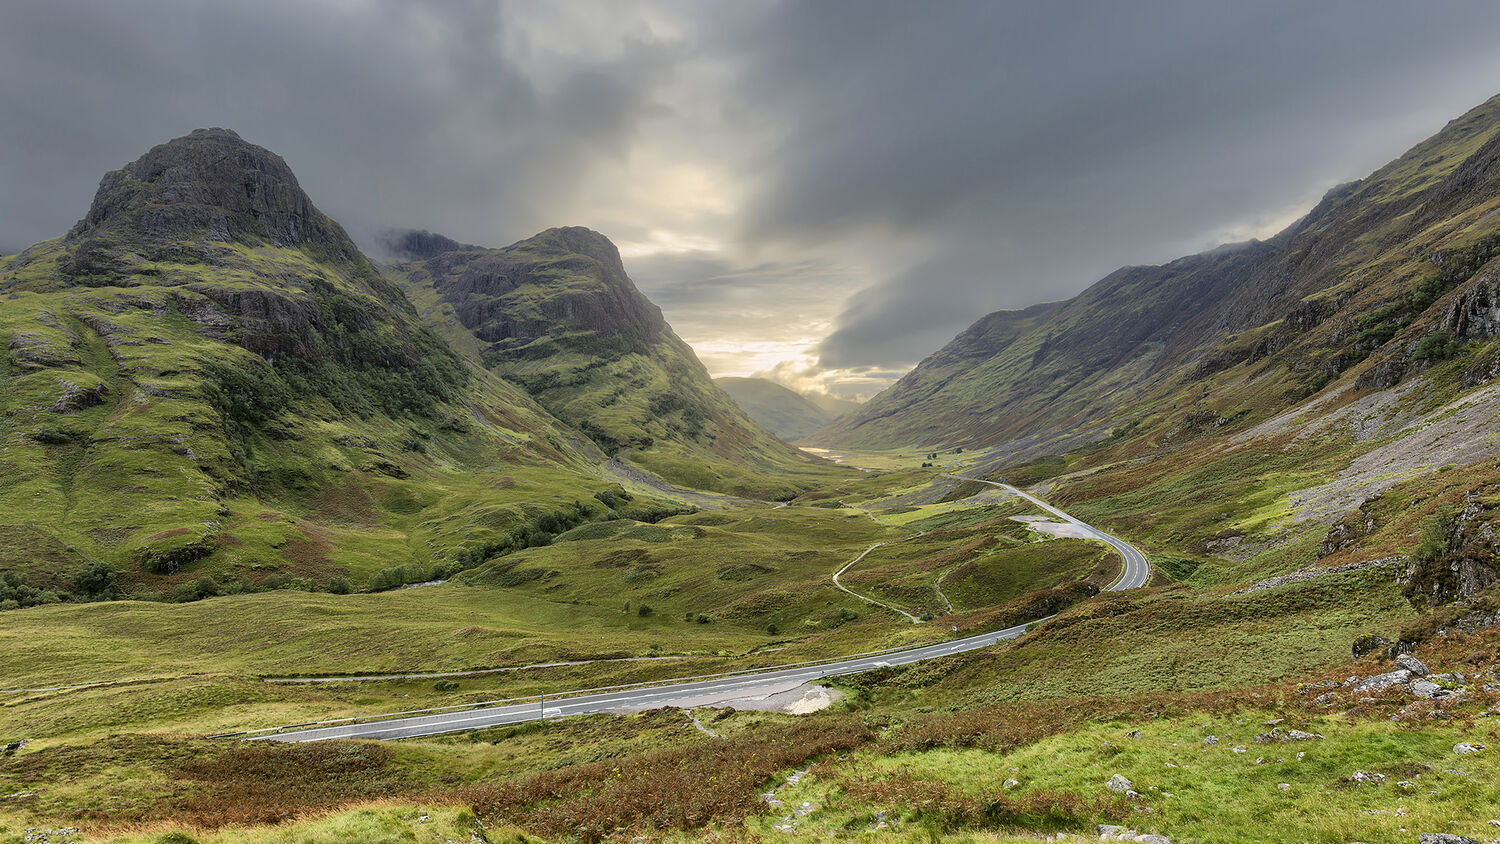 A view of Glencoe, with the golden sun shining through the dark clouds at the far end. The road snakes through the bottom of the glen, as towering mountains rise either side.